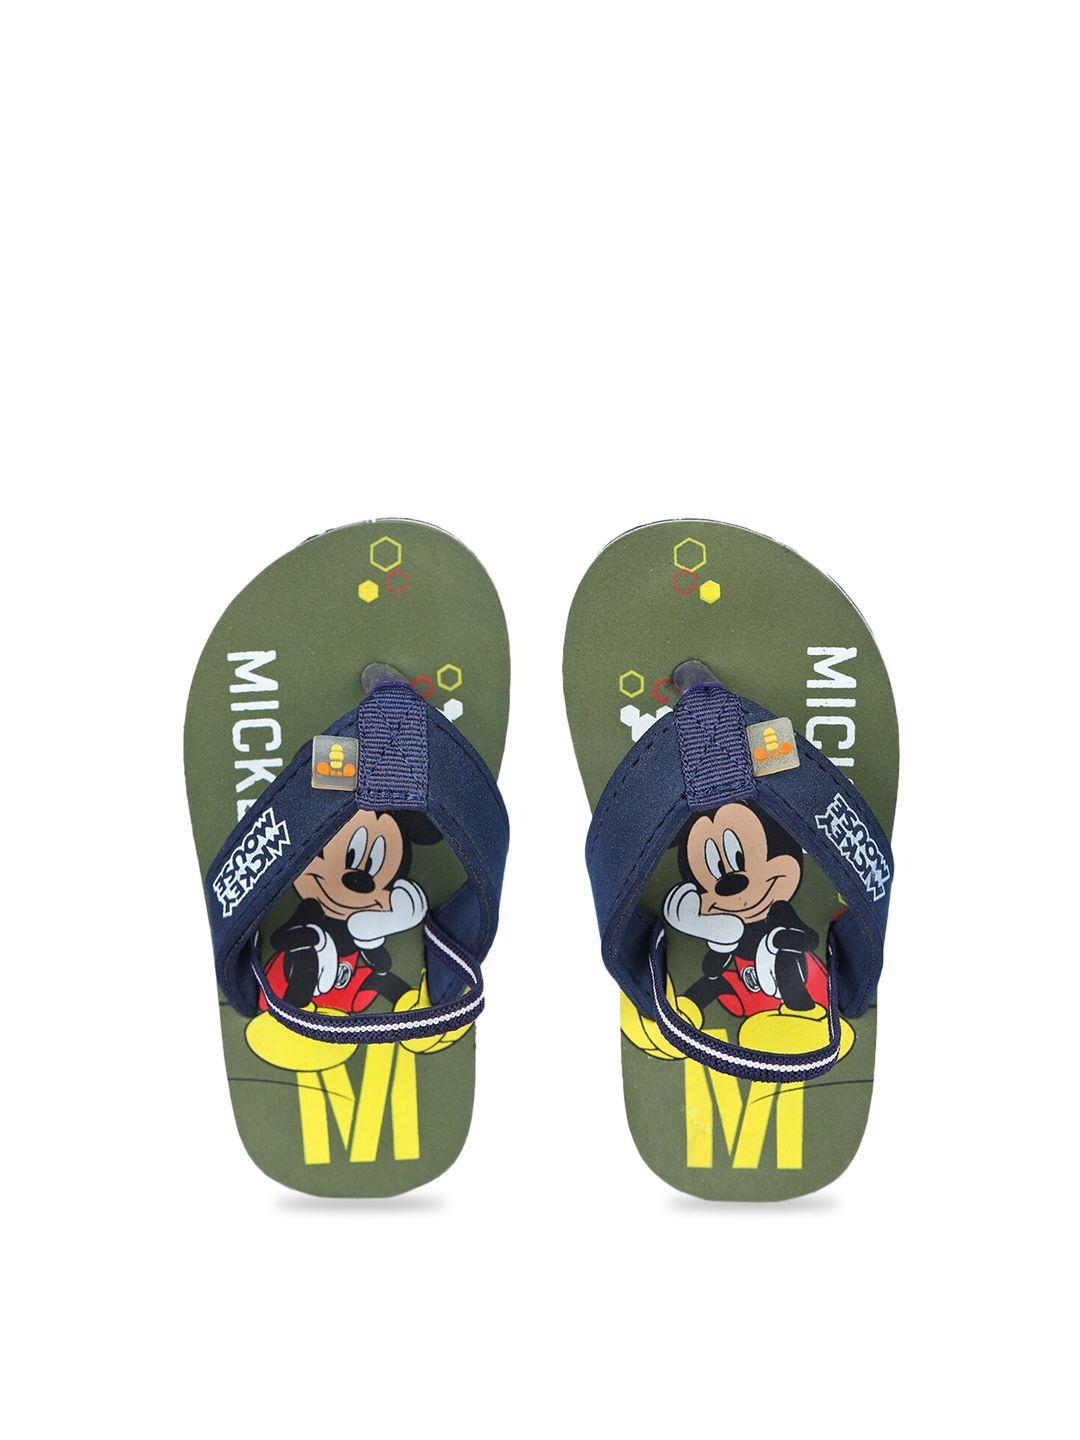 toothless-boys-olive-green-&-red-printed-rubber-thong-flip-flops